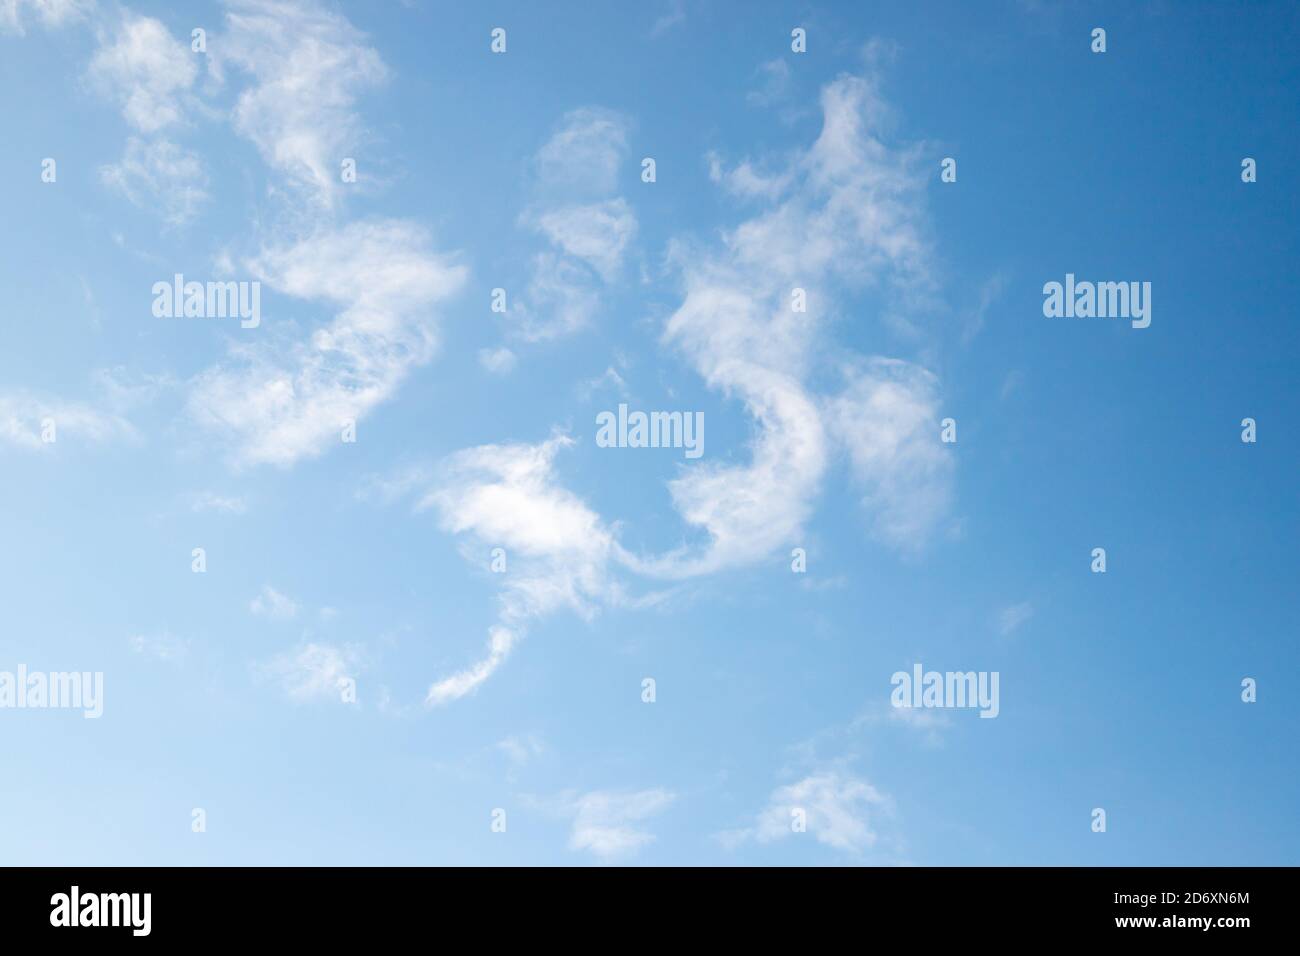 Bright blue sky with white altocumulus clouds, natural background photo texture Stock Photo